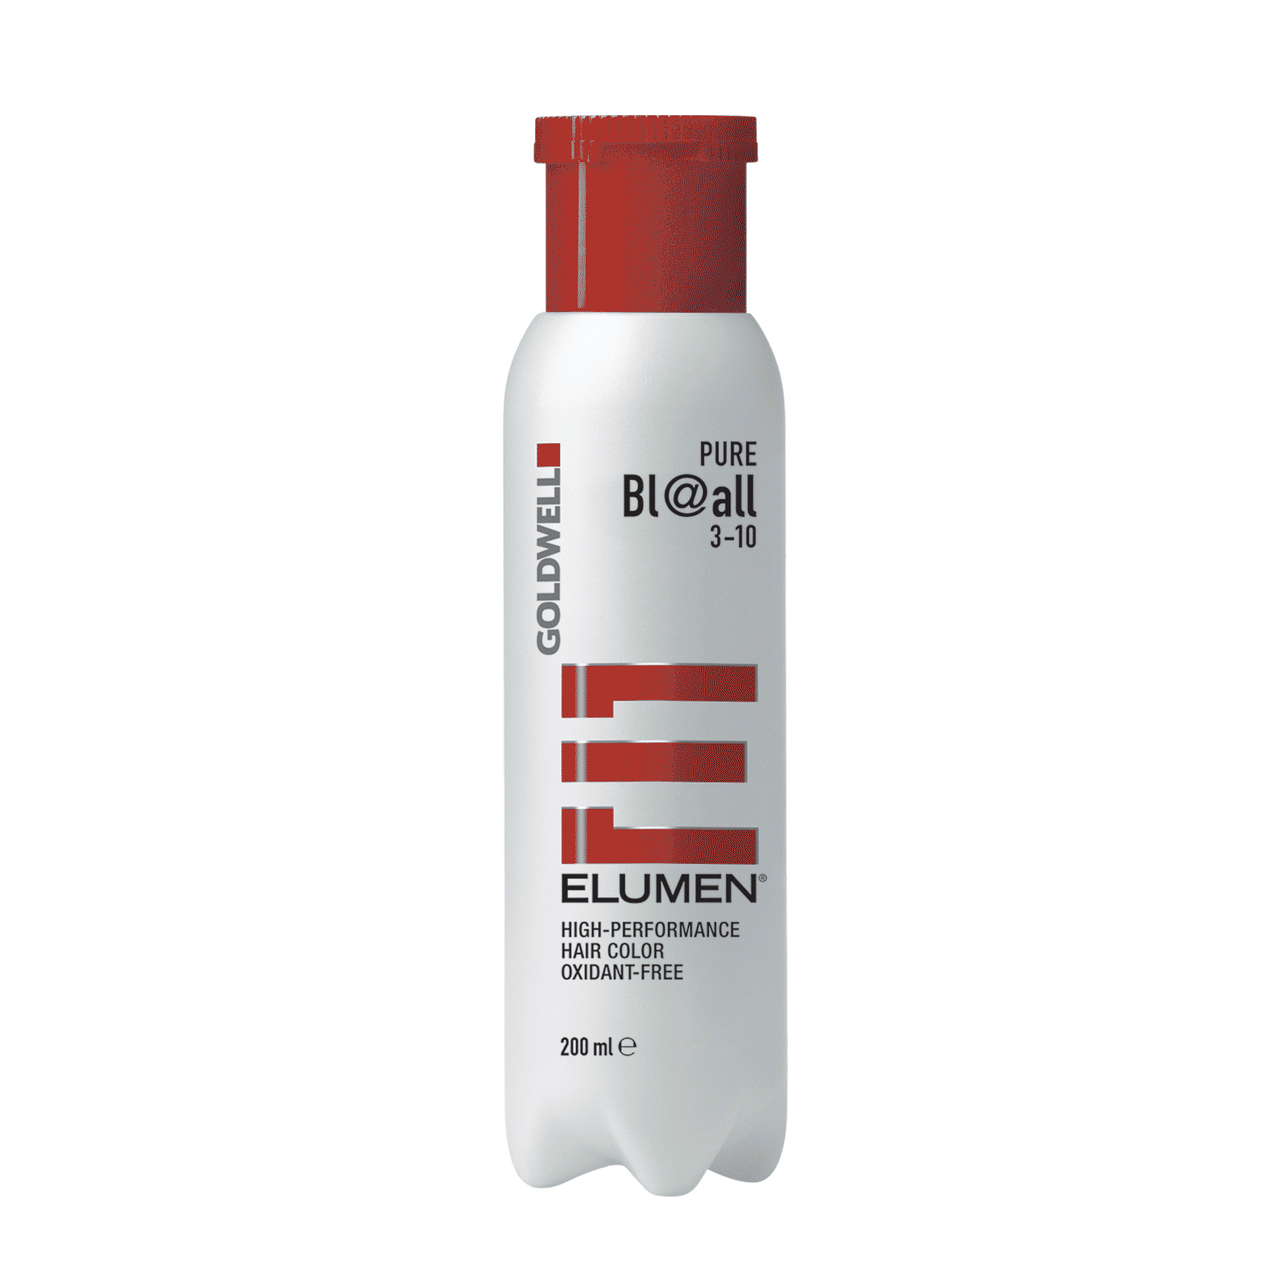 Goldwell  BL@ALL Pure 